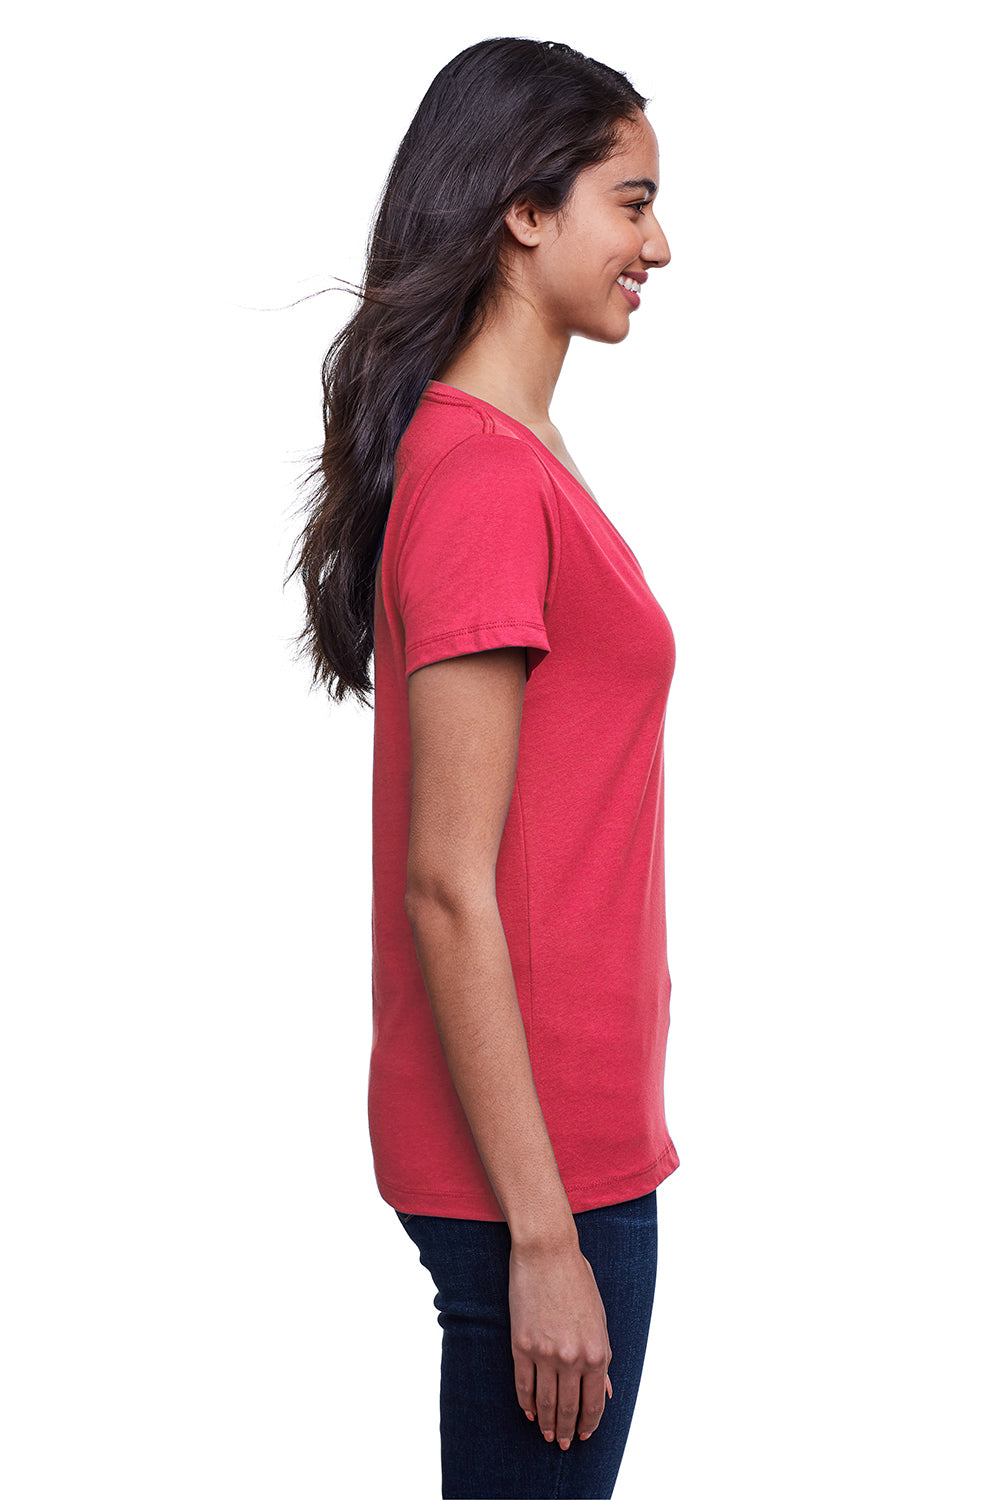 Next Level N4240 Womens Eco Performance Moisture Wicking Short Sleeve V-Neck T-Shirt Heather Red Side